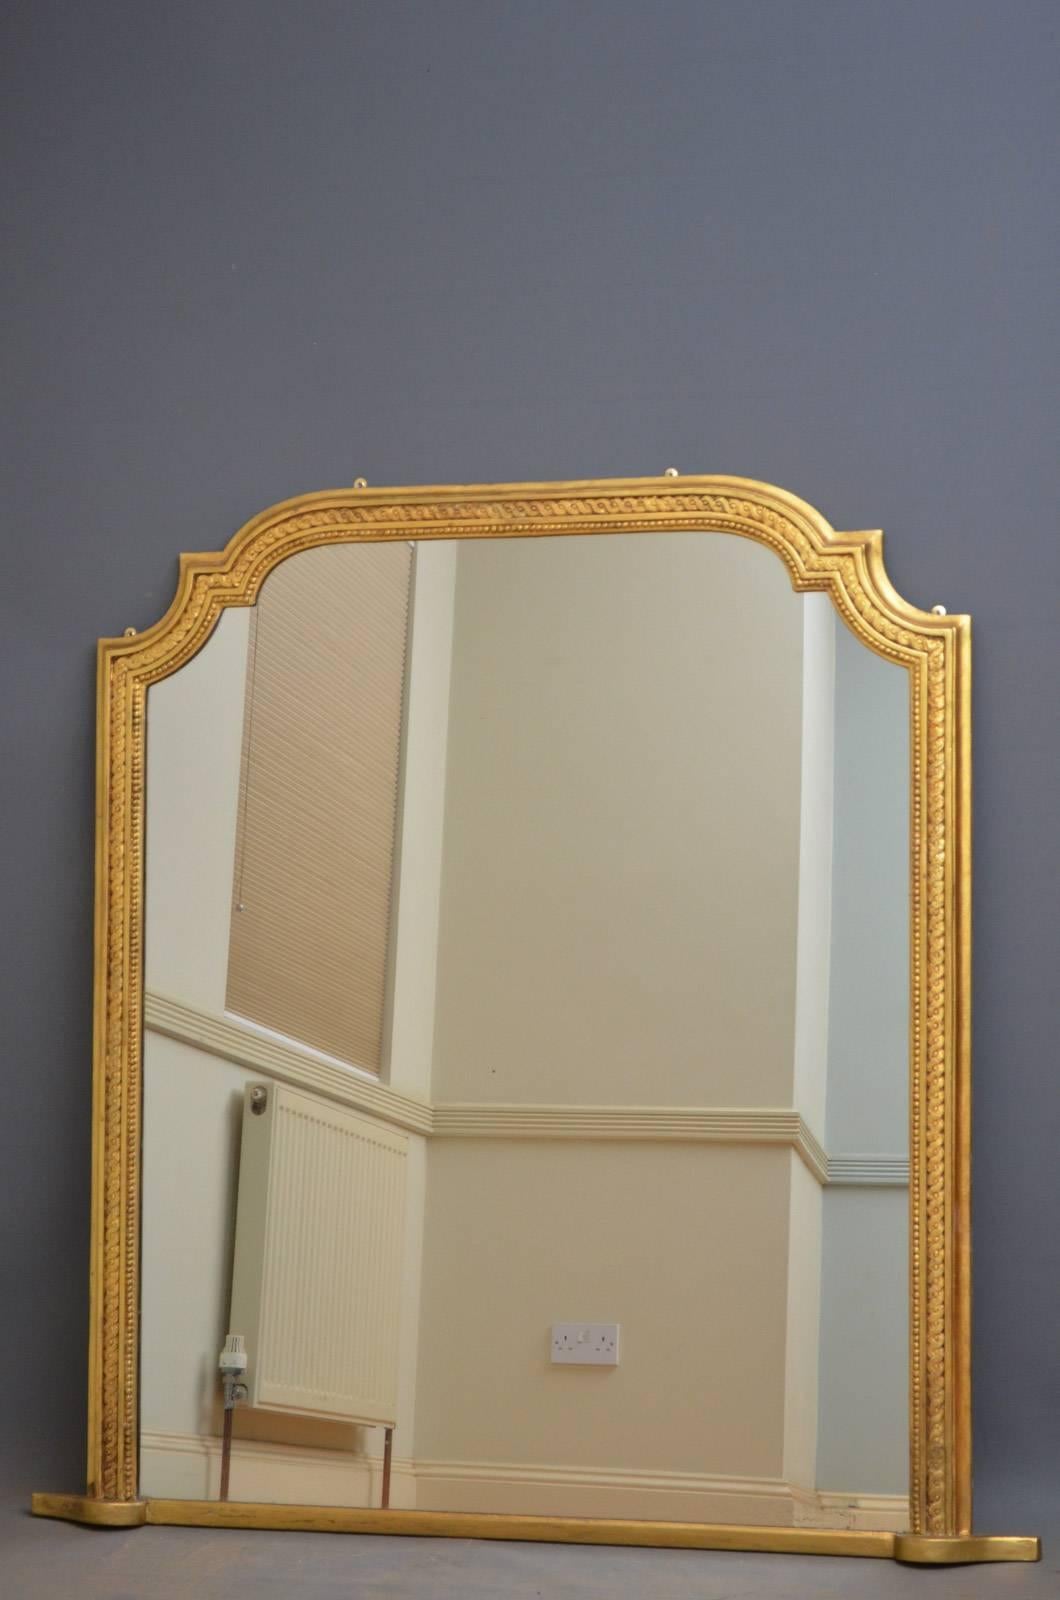 K0283, large Victorian giltwood mirror of arched form, having original mirror plate with some foxing in moulded frame. This mirror retains its original gilt with some refinishing and character with wear consistent with age and use. All in wonderful